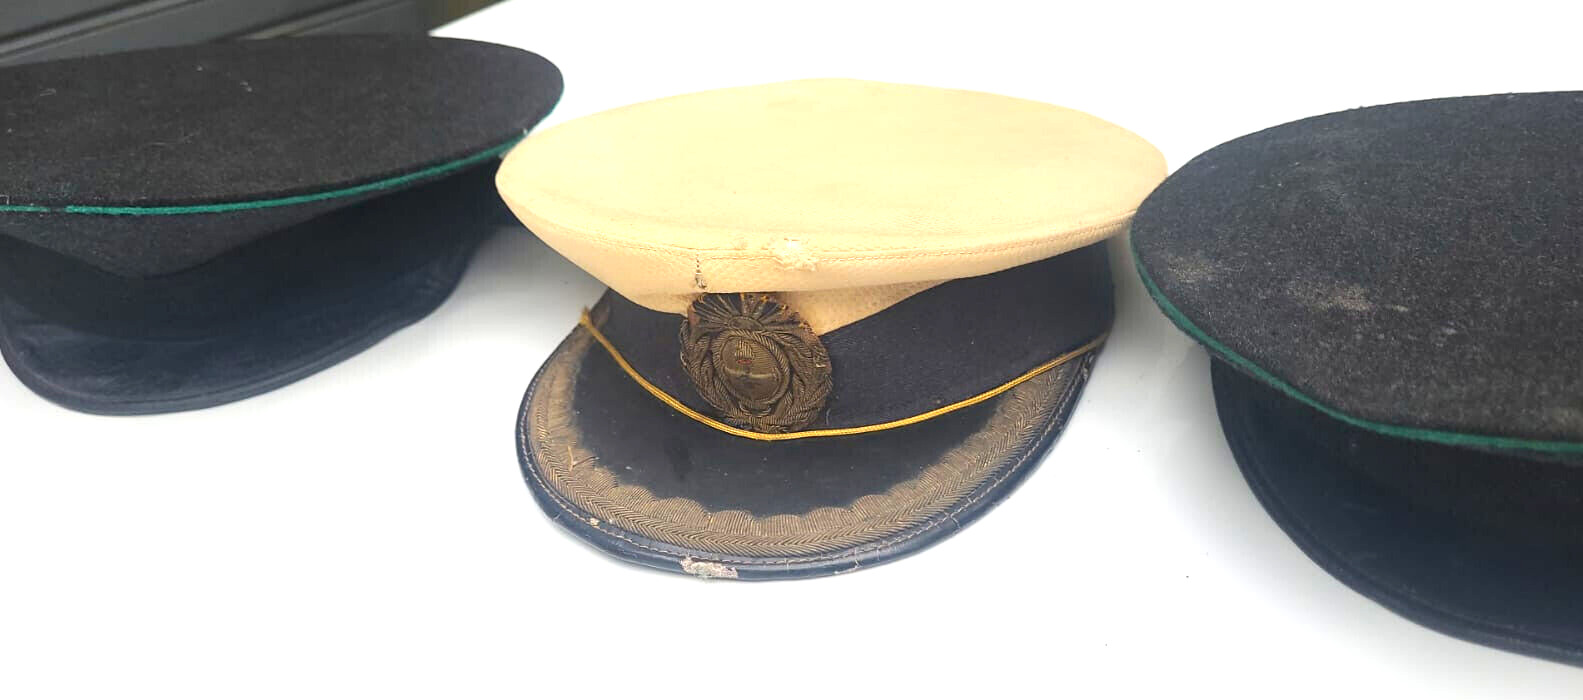 3 Vintage Military Hat Collection - Authentic Army Cap from 1950s Argentina